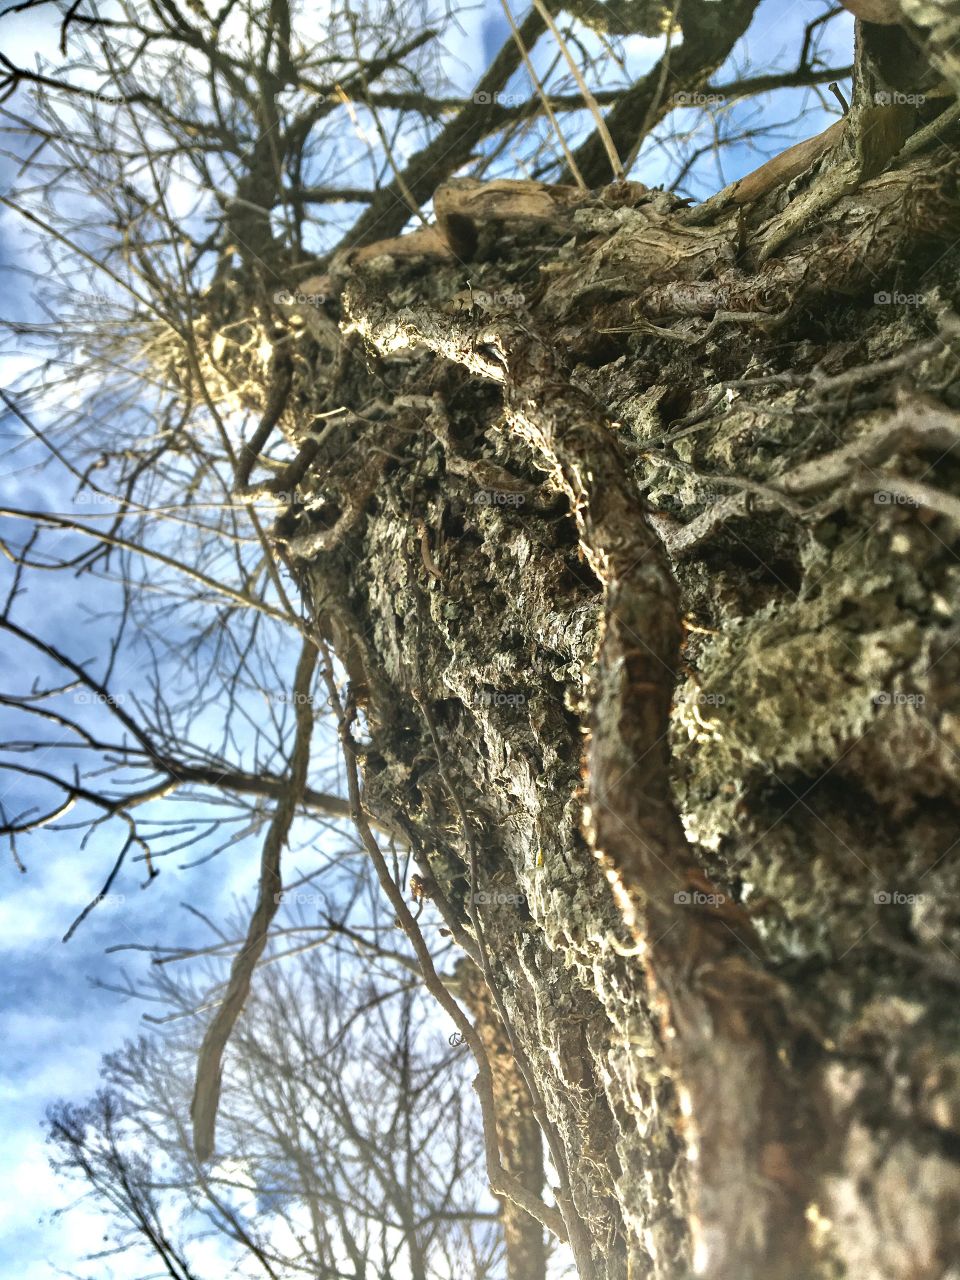 Vines of a Tree